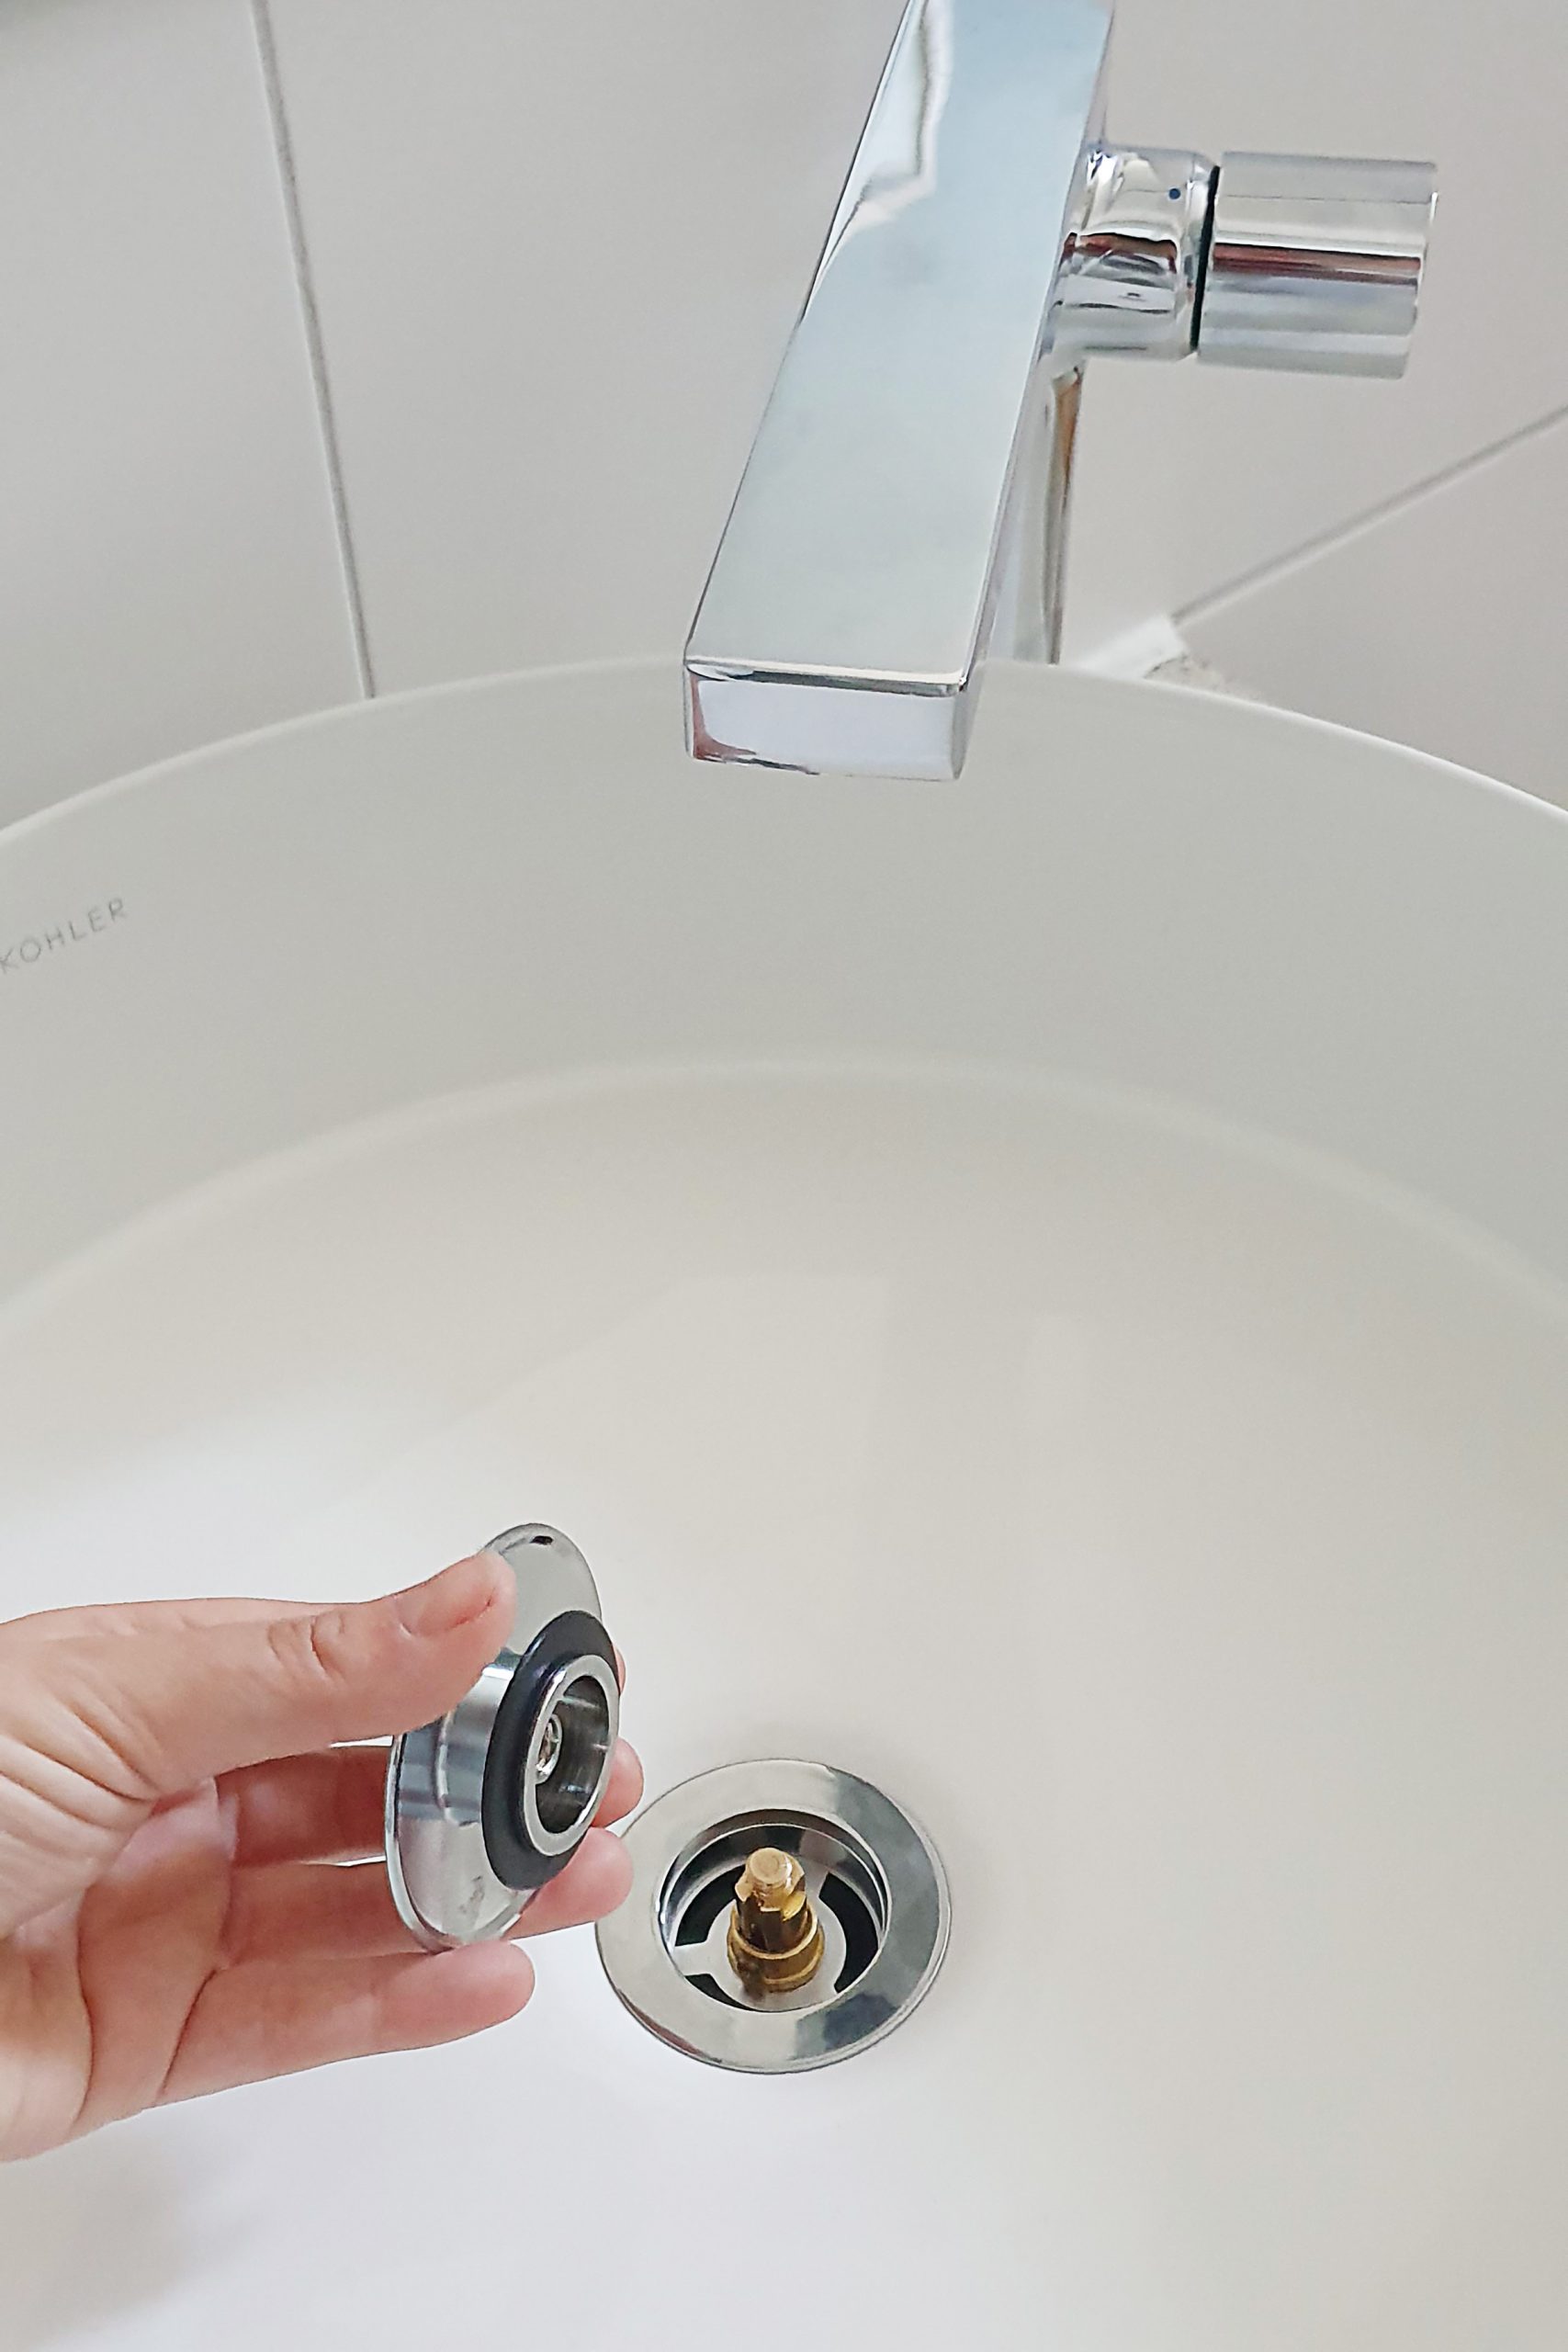 How To Install A Bathroom Tap & Washbasin - Little House On The Corner